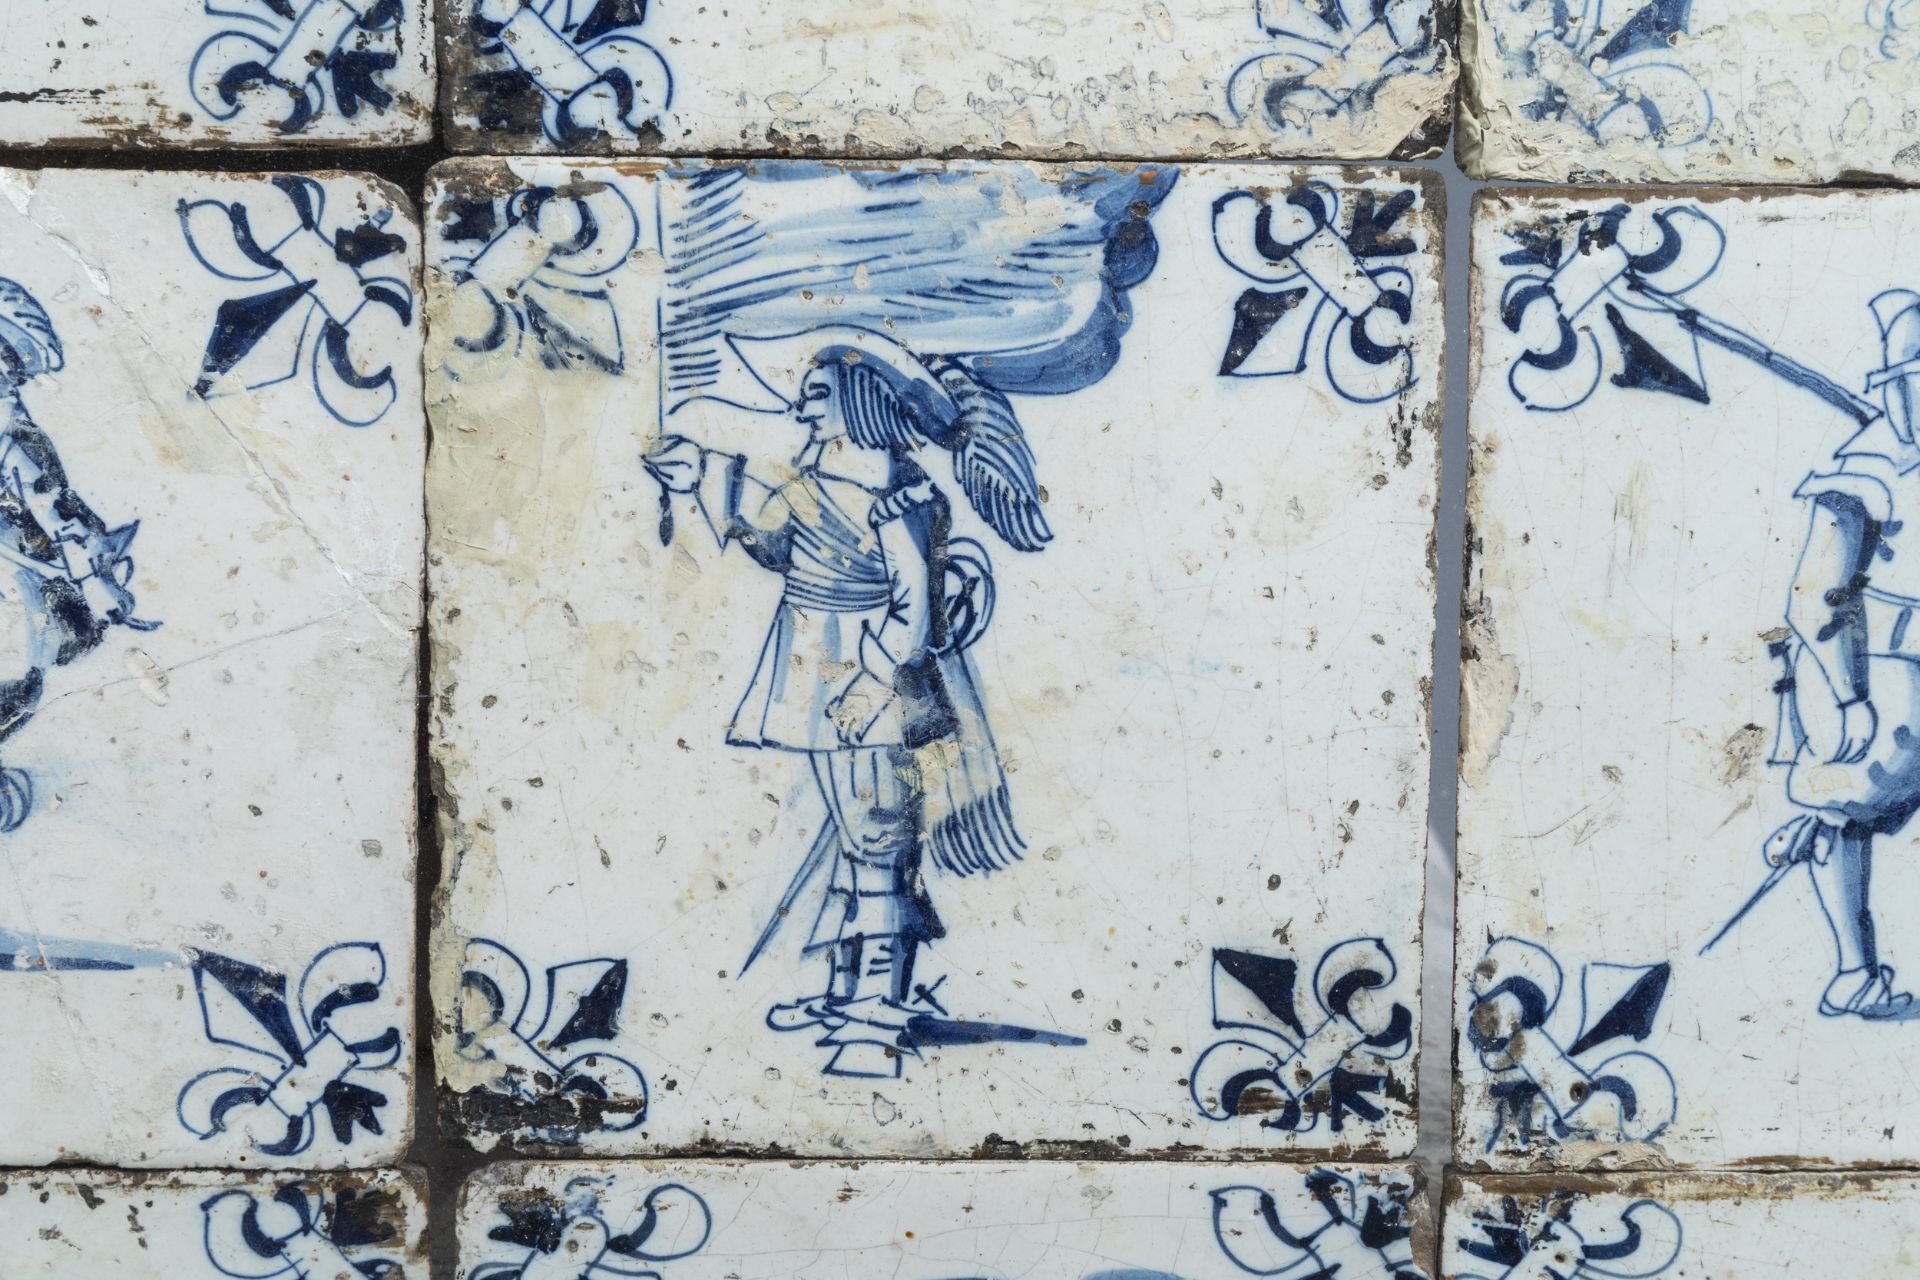 Sixteen Dutch Delft blue and white tiles with soldiers, 17th C. - Image 4 of 5